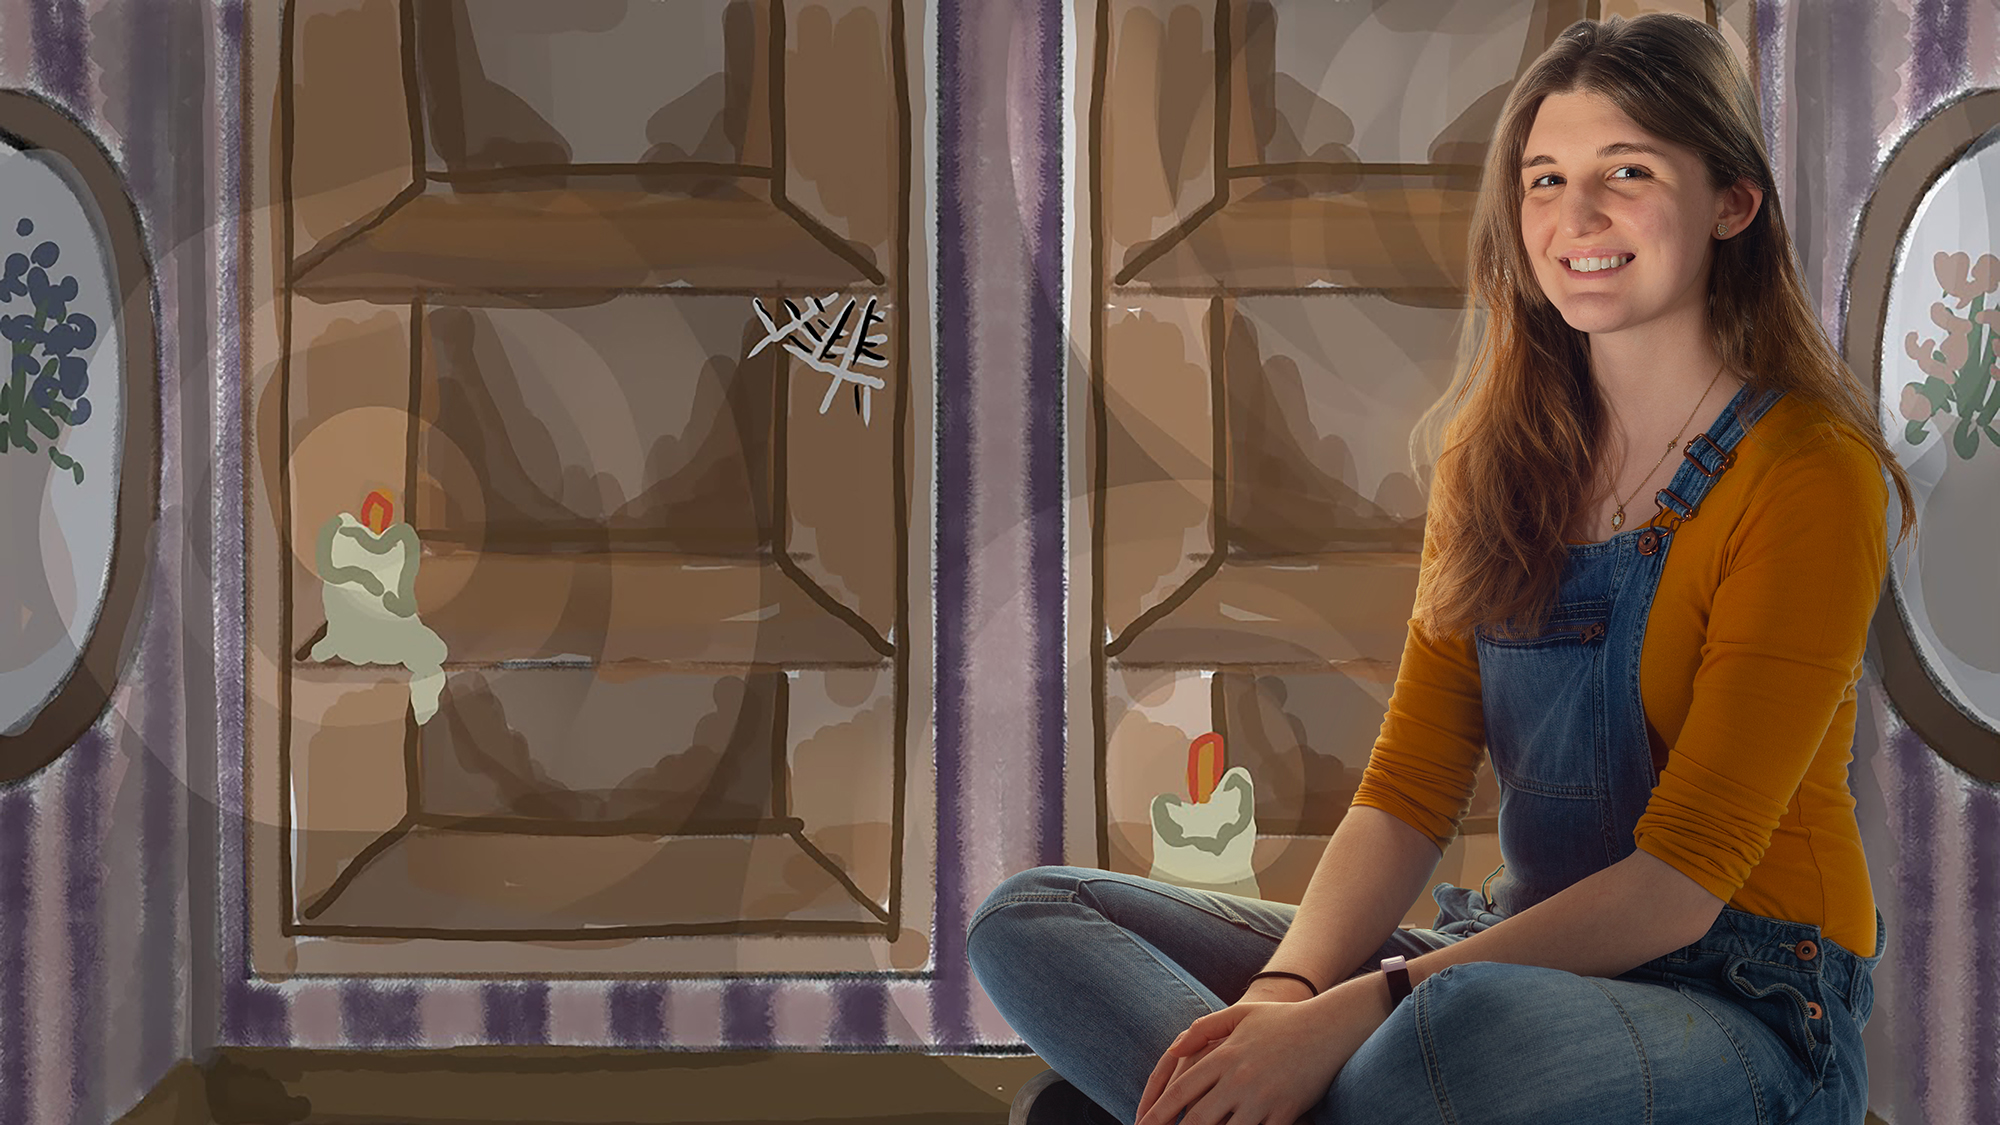 A composite portrait of Julie Toich over an illustration of cabinets with spider webs and lit candles.